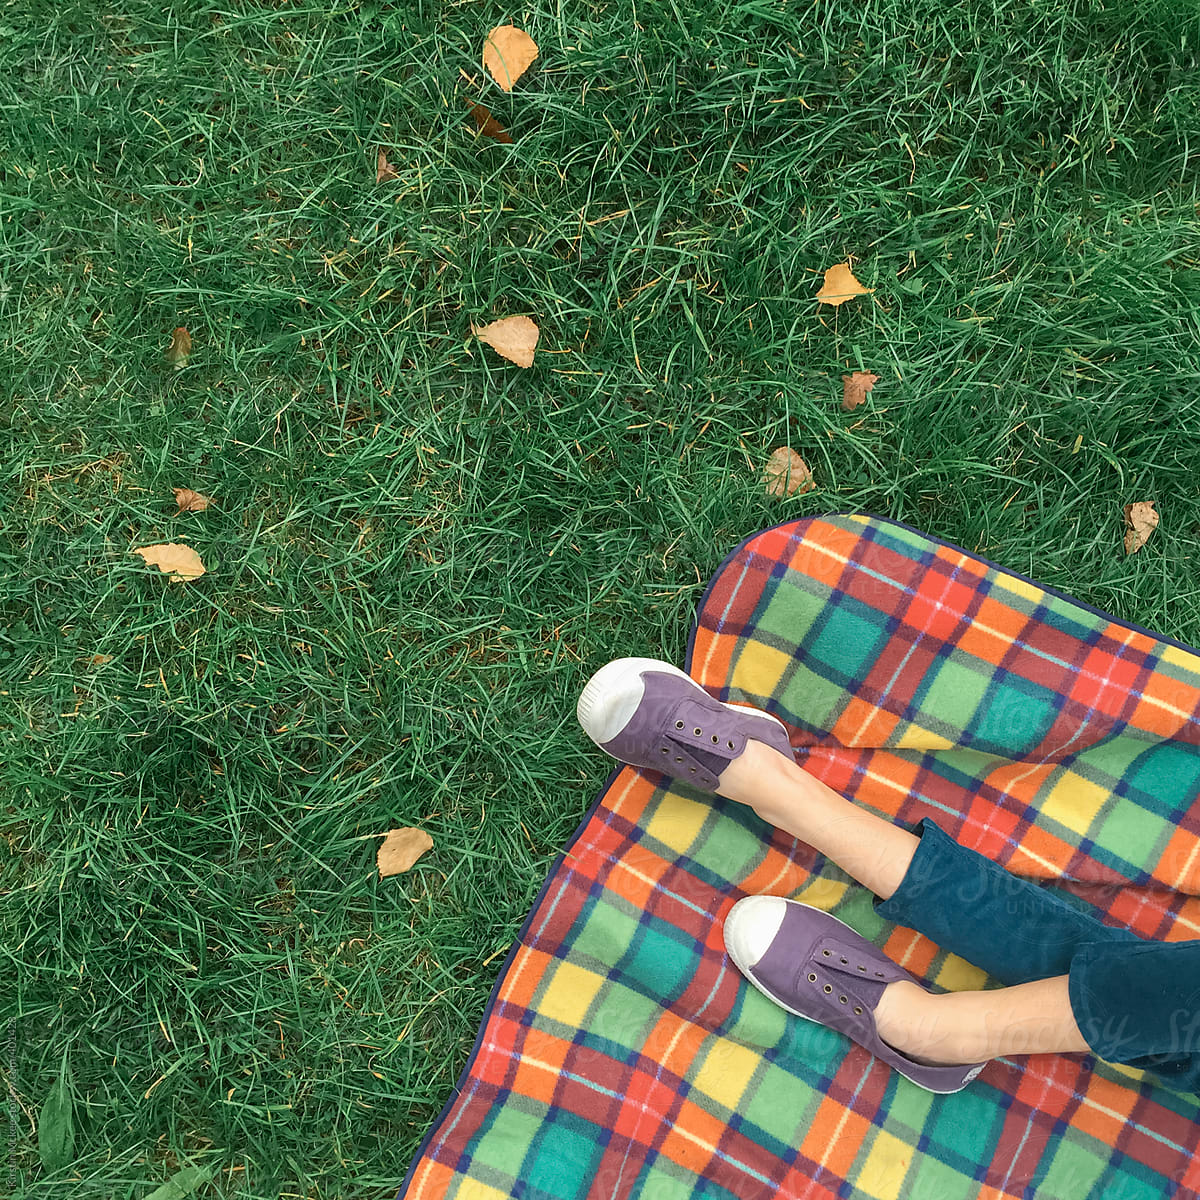 Picnic rug (and legs) on an early autumnal day